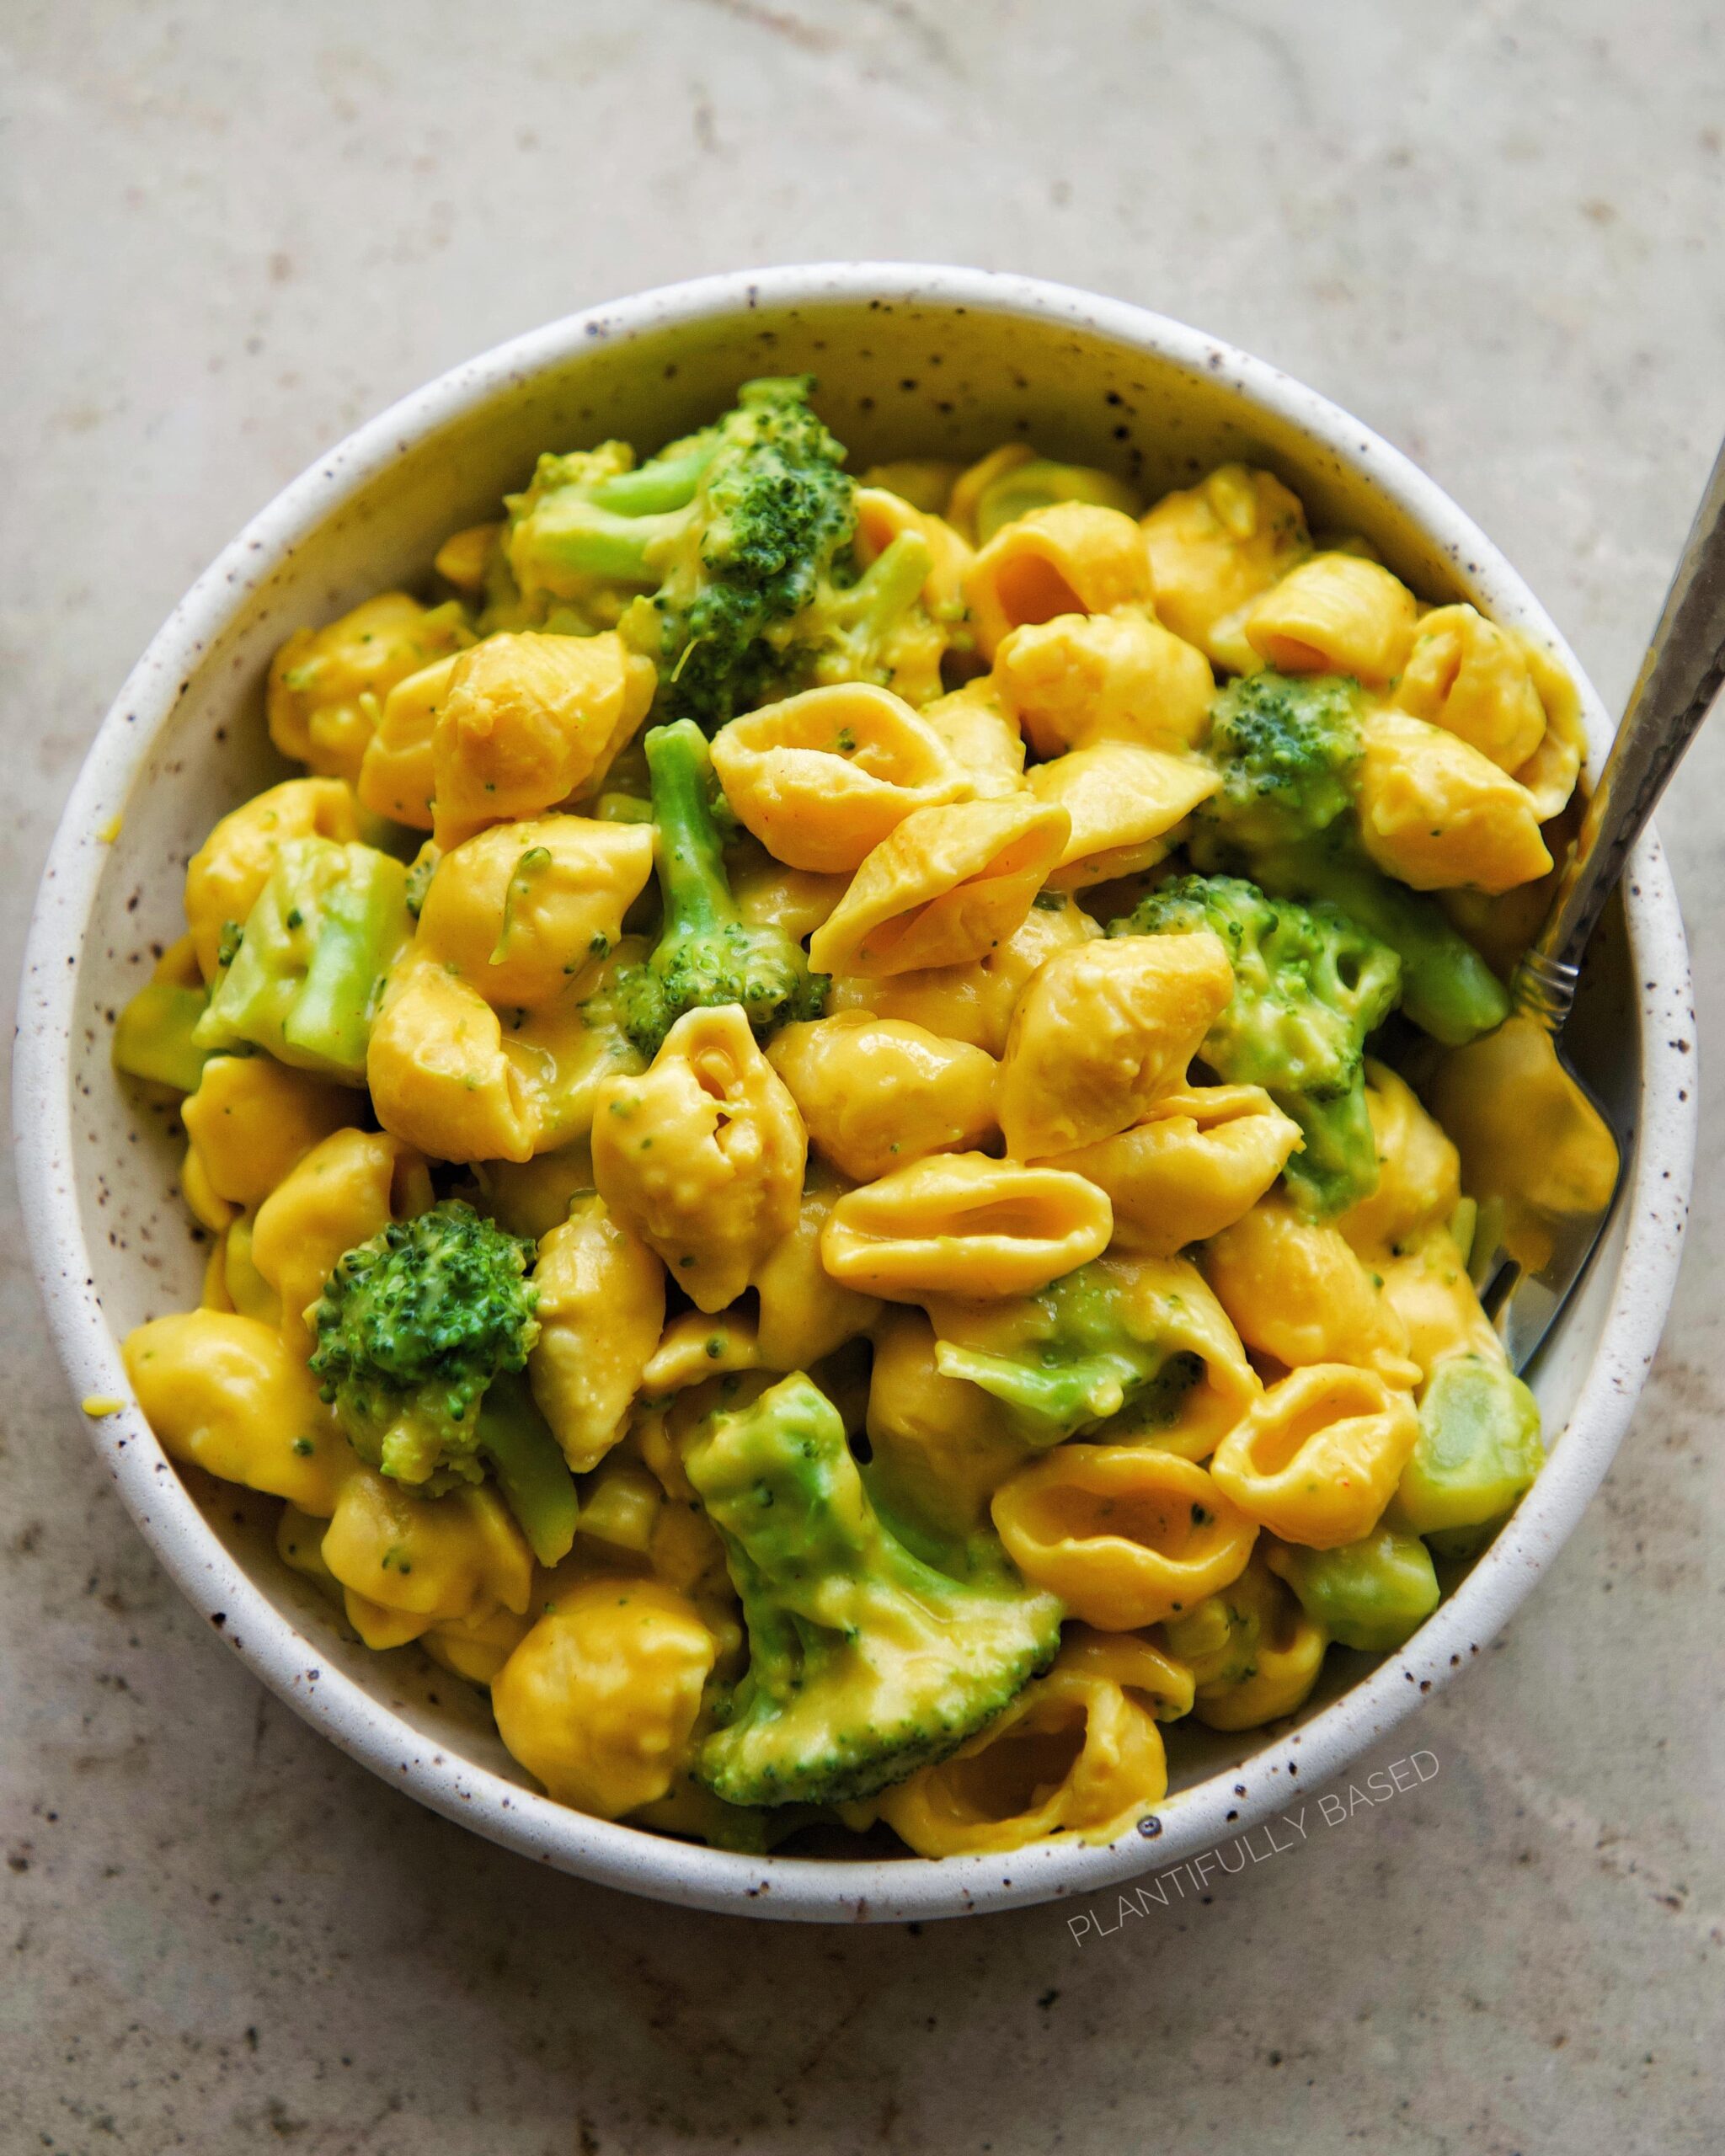  Get ready to indulge in this creamy and cheesy pasta dish, without any gluten or dairy!